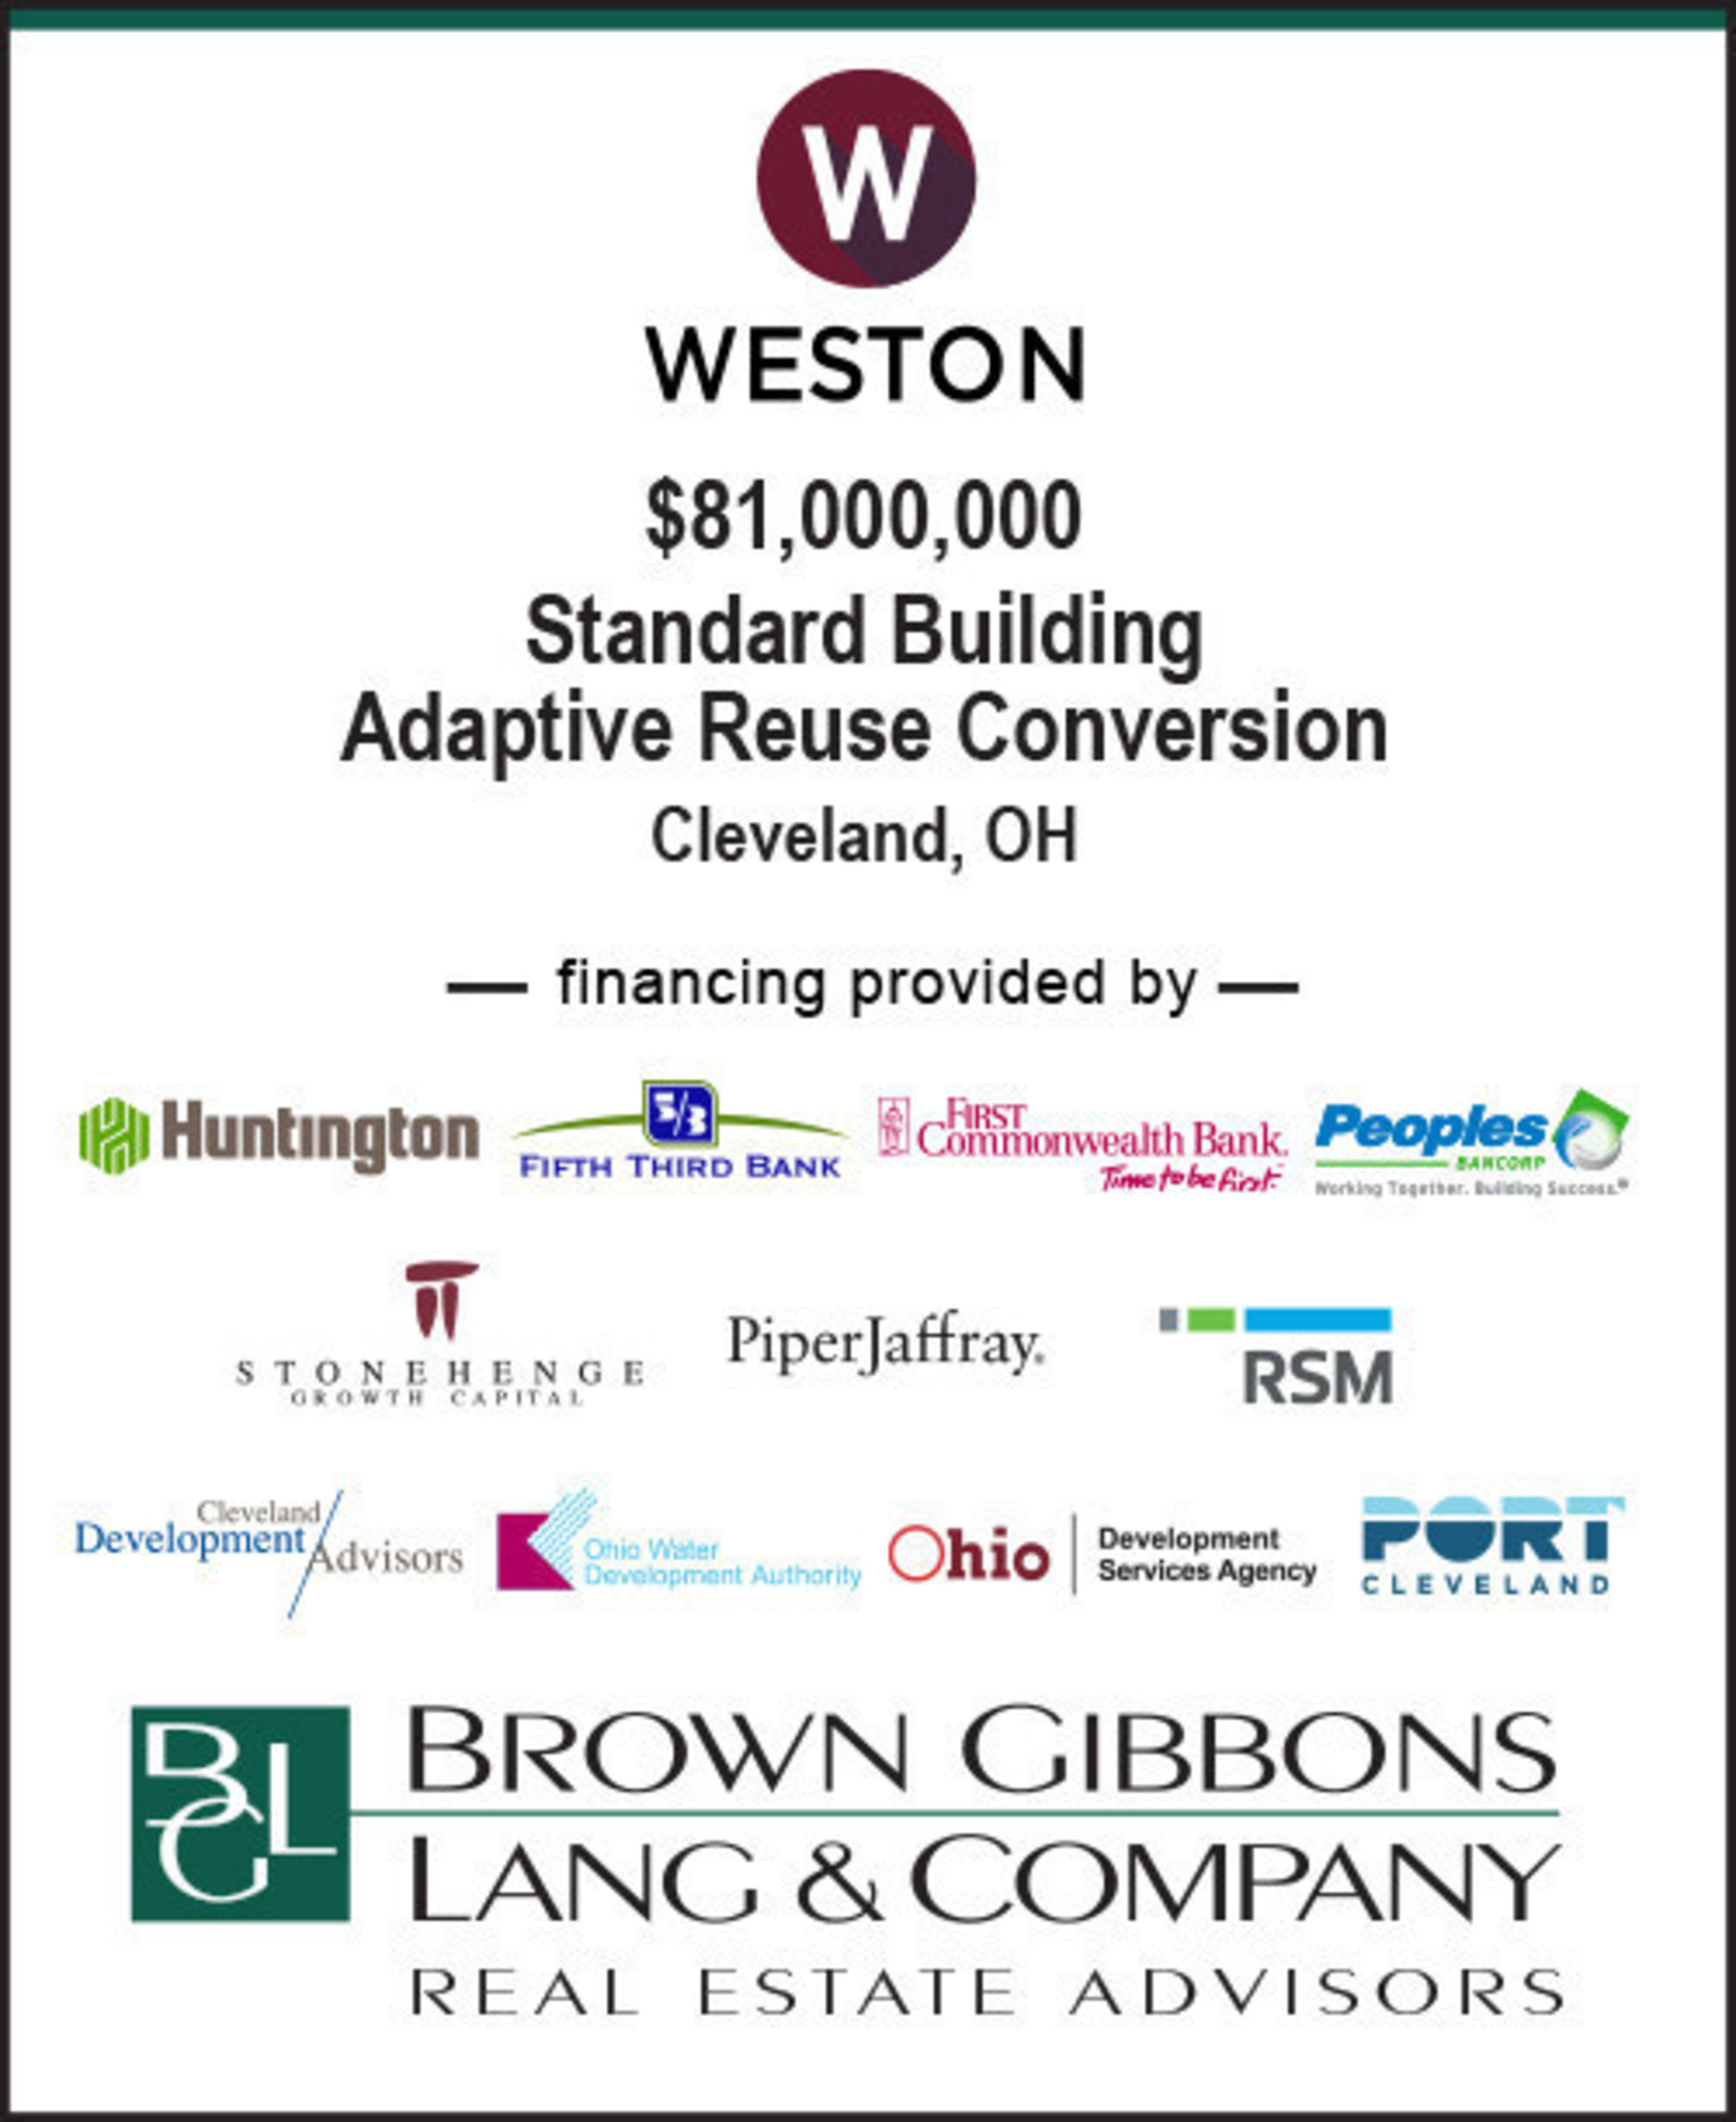 BGL Real Estate Advisors LLC completed development financing for Weston Inc. The multi-faceted capital structure will support the historical conversion of the Standard Building from Class B office space into market rate luxury apartments in downtown Cleveland, Ohio. The $81.0 million financing consisted of: (i) senior construction debt, (ii) subordinated bridge debt, (iii) municipal city and state agency debt (iv) Federal and State Historic Tax Credit Equity, and (v) Weston Inc. GP equity.